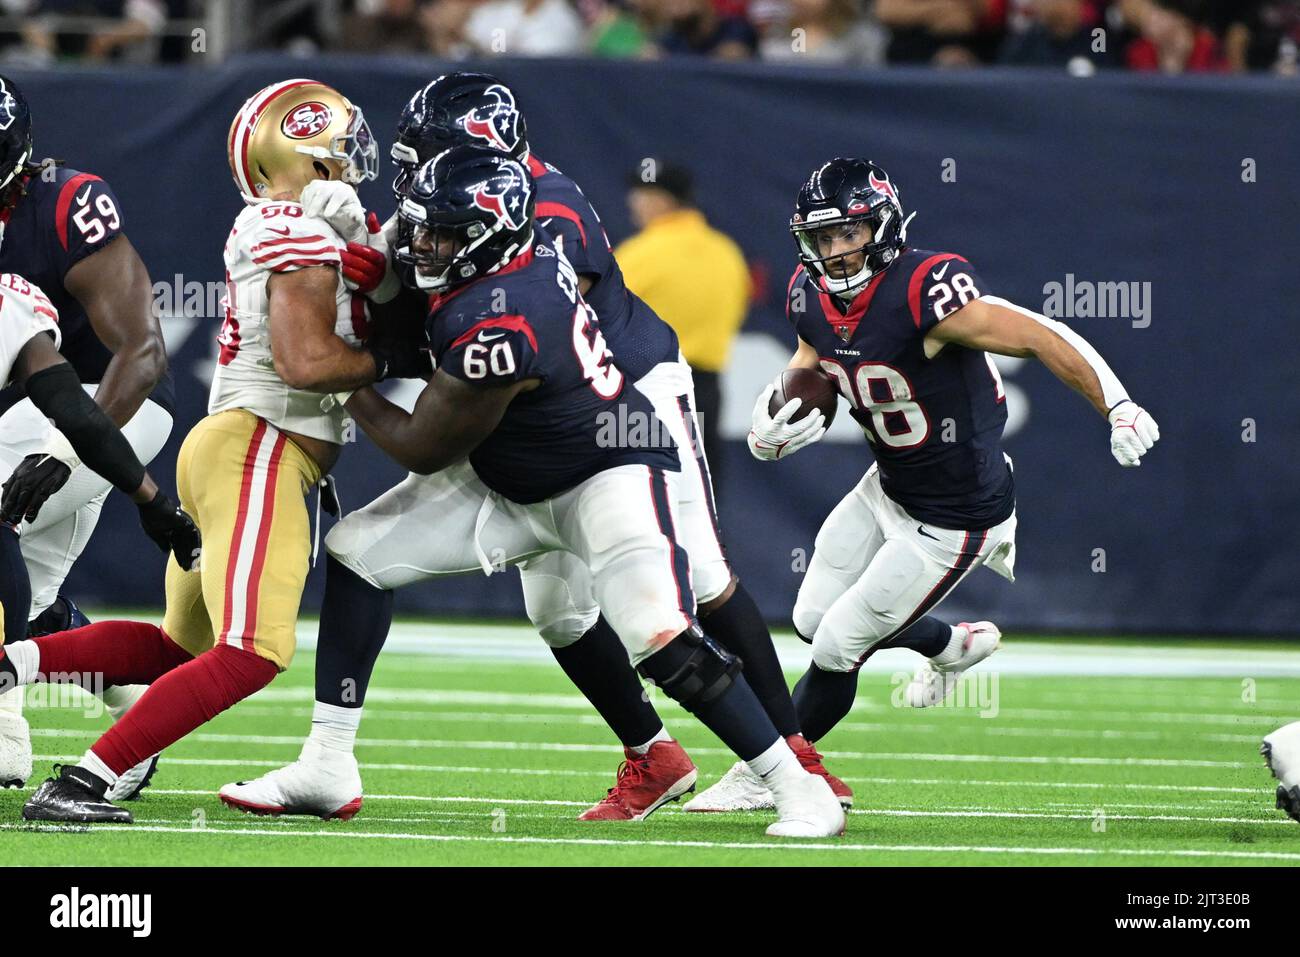 Houston Texans running back Rex Burkhead (28) turns the corner with a block by Houston Texans guard A.J. Cann (60) during the NFL game between the San Stock Photo